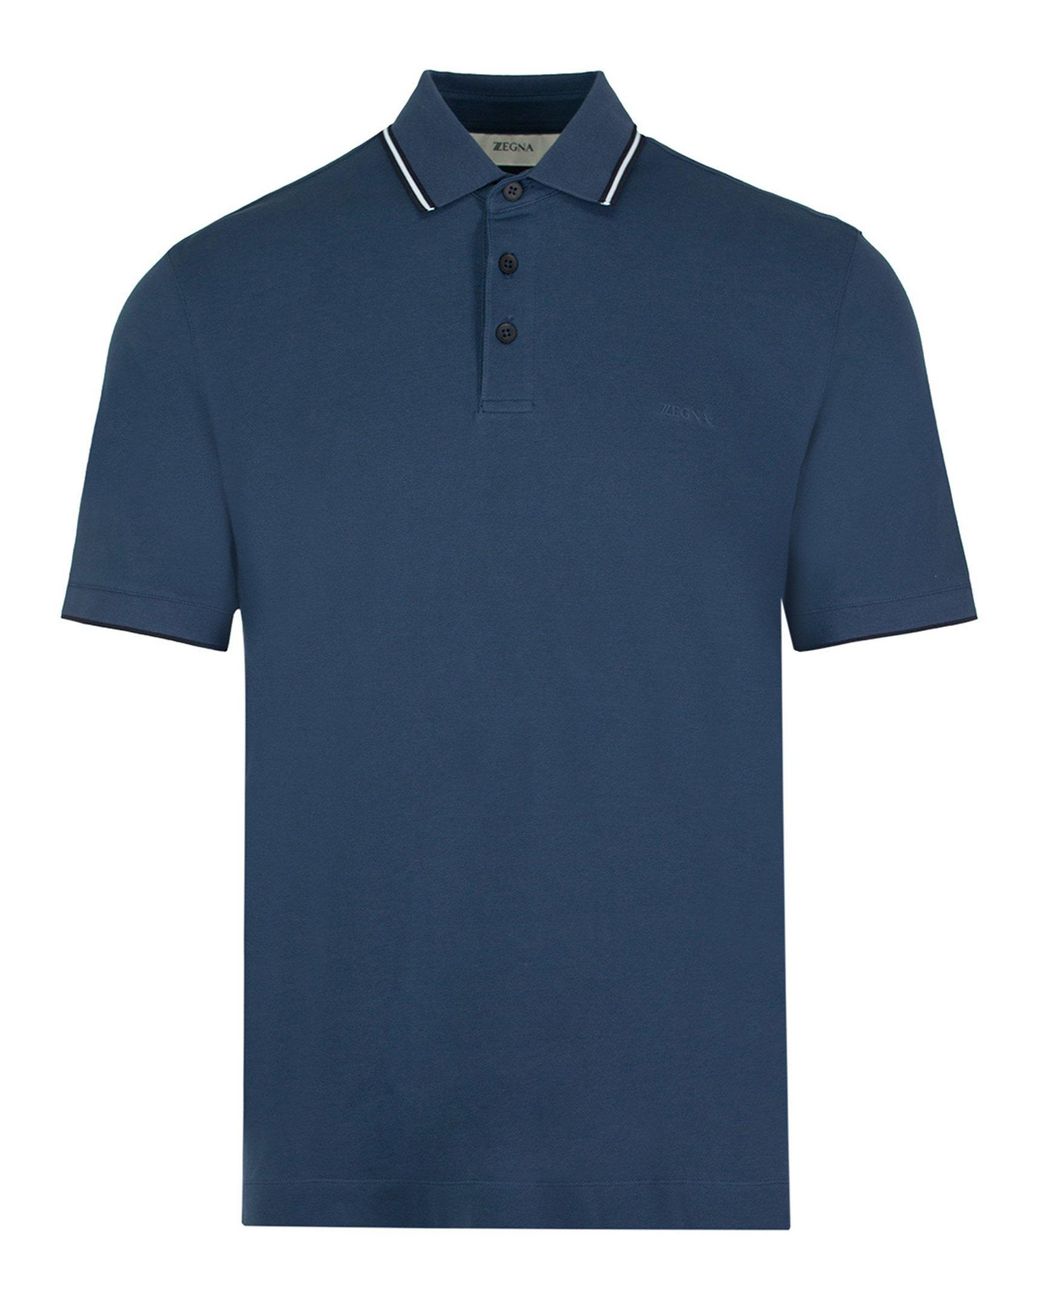 Z Zegna Cotton Classic Polo Shirt in Blue for Men - Lyst